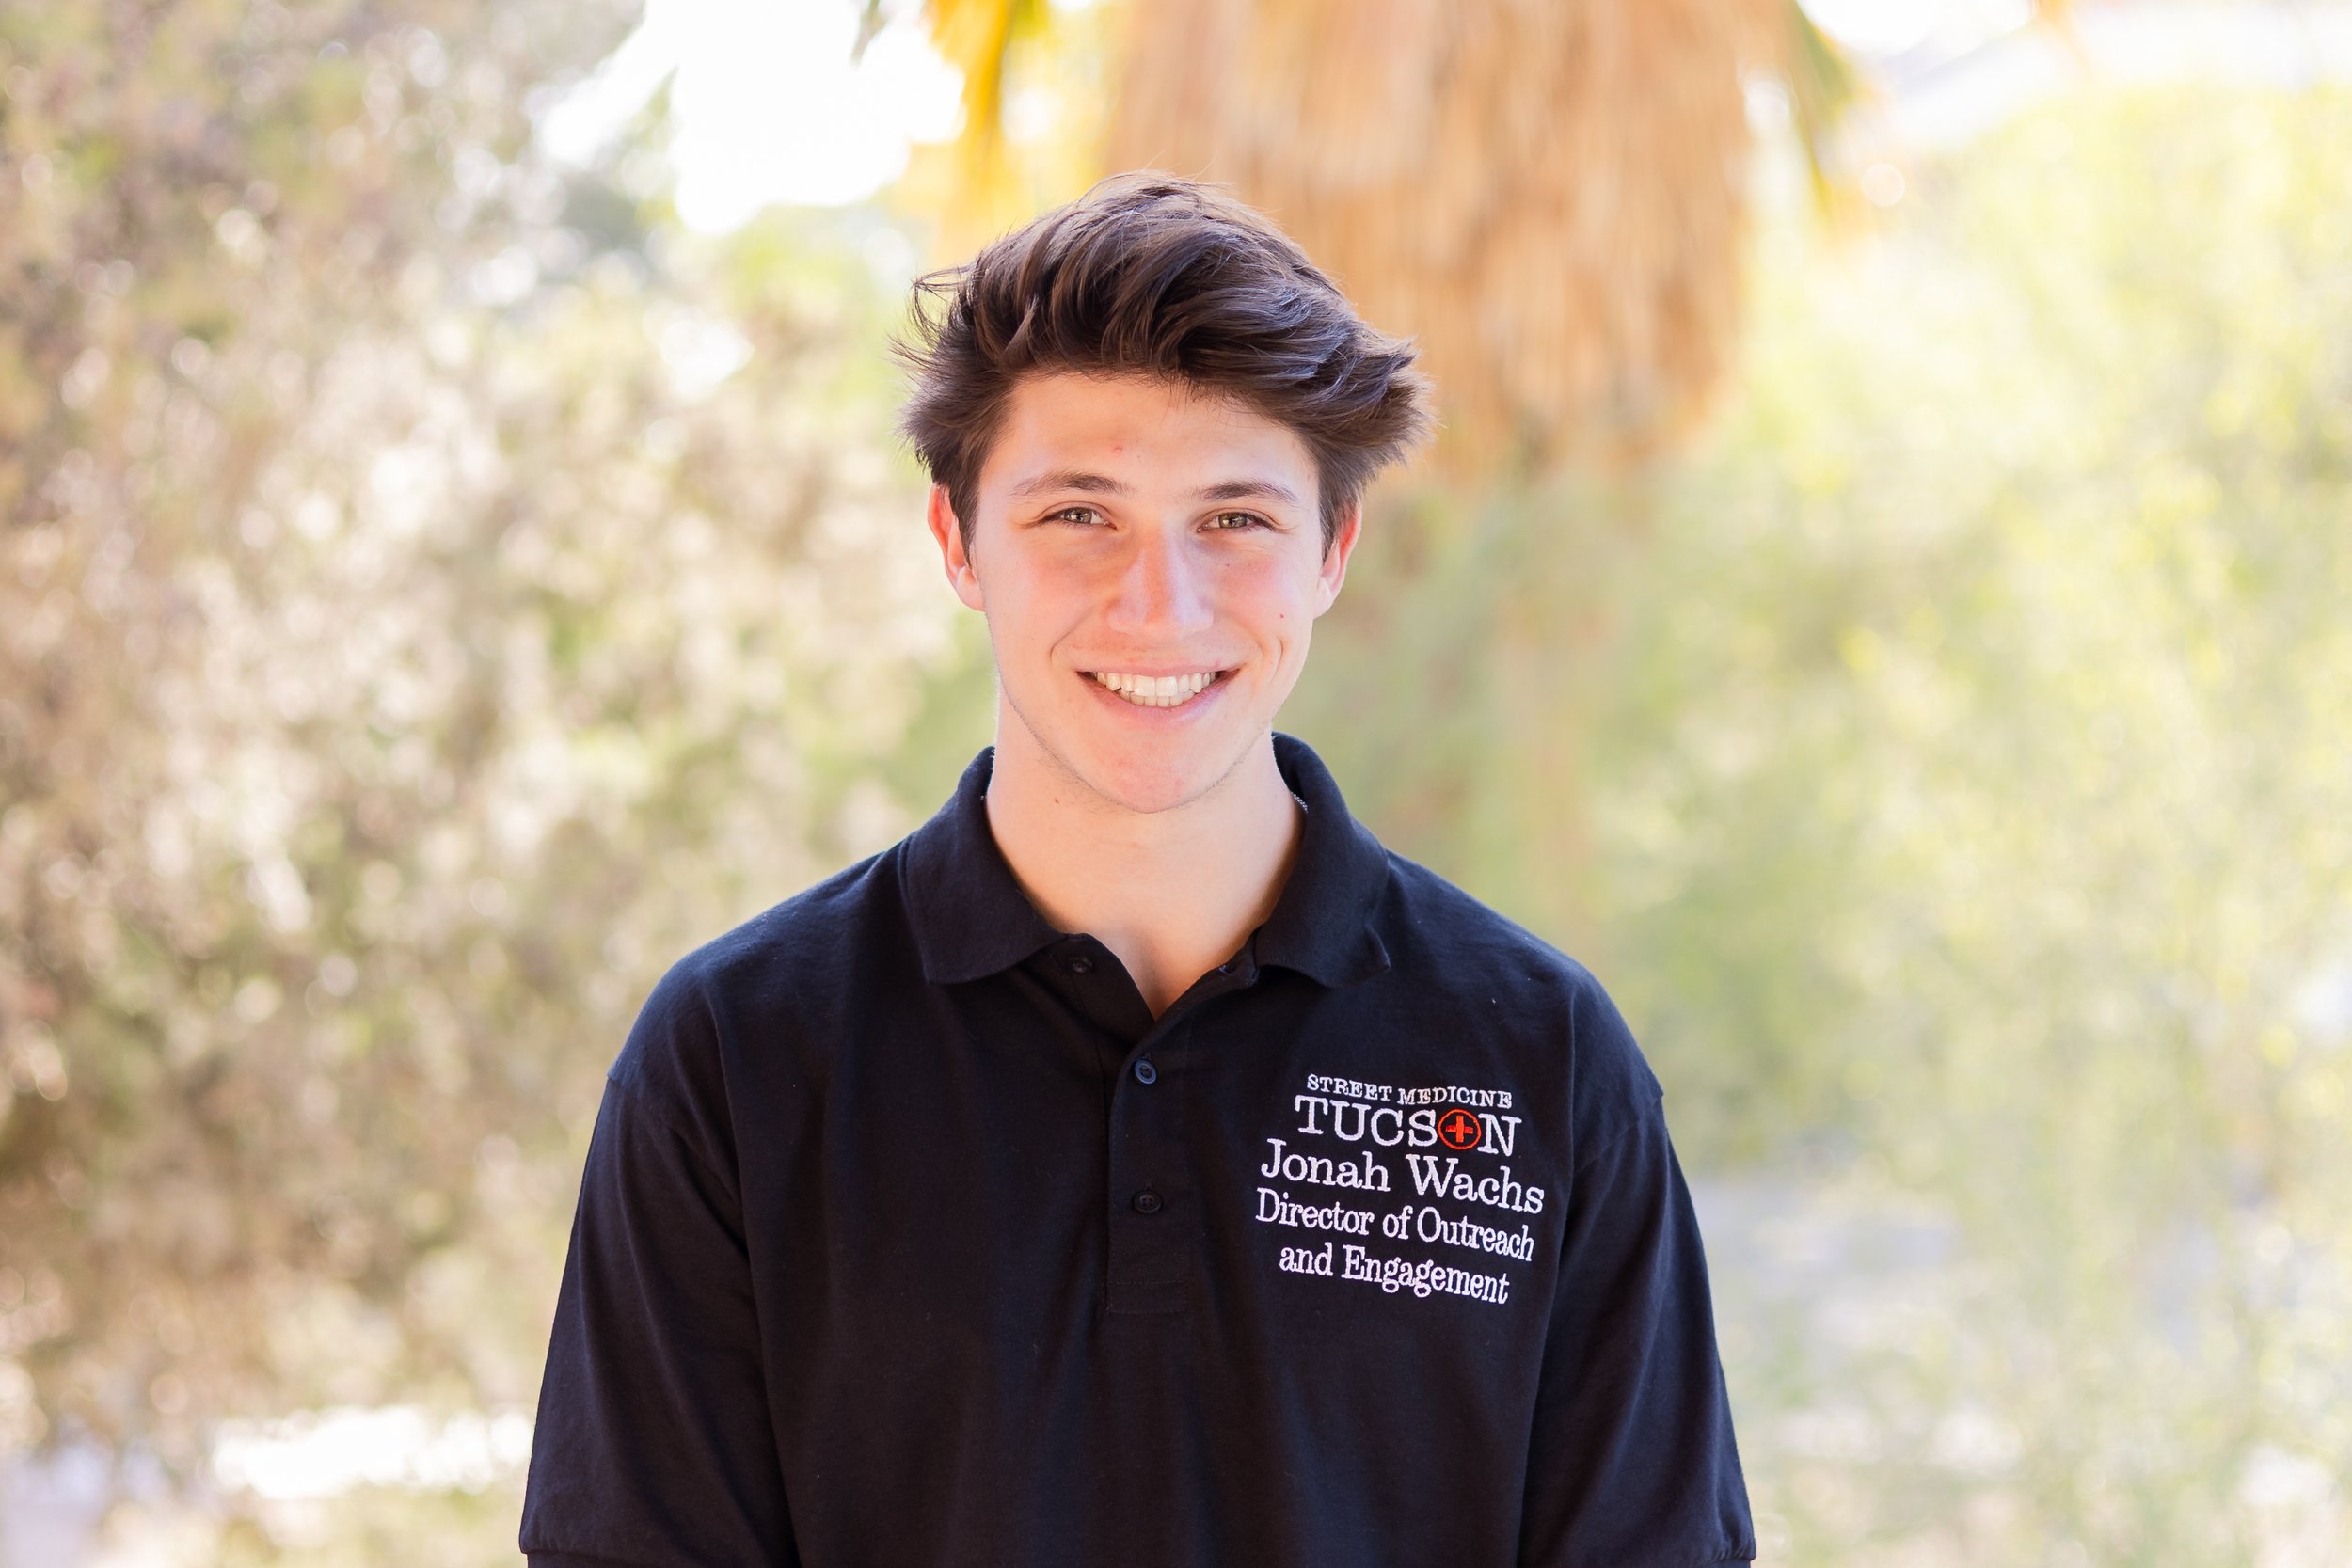 Director of Outreach and Engagement: Jonah Wachs